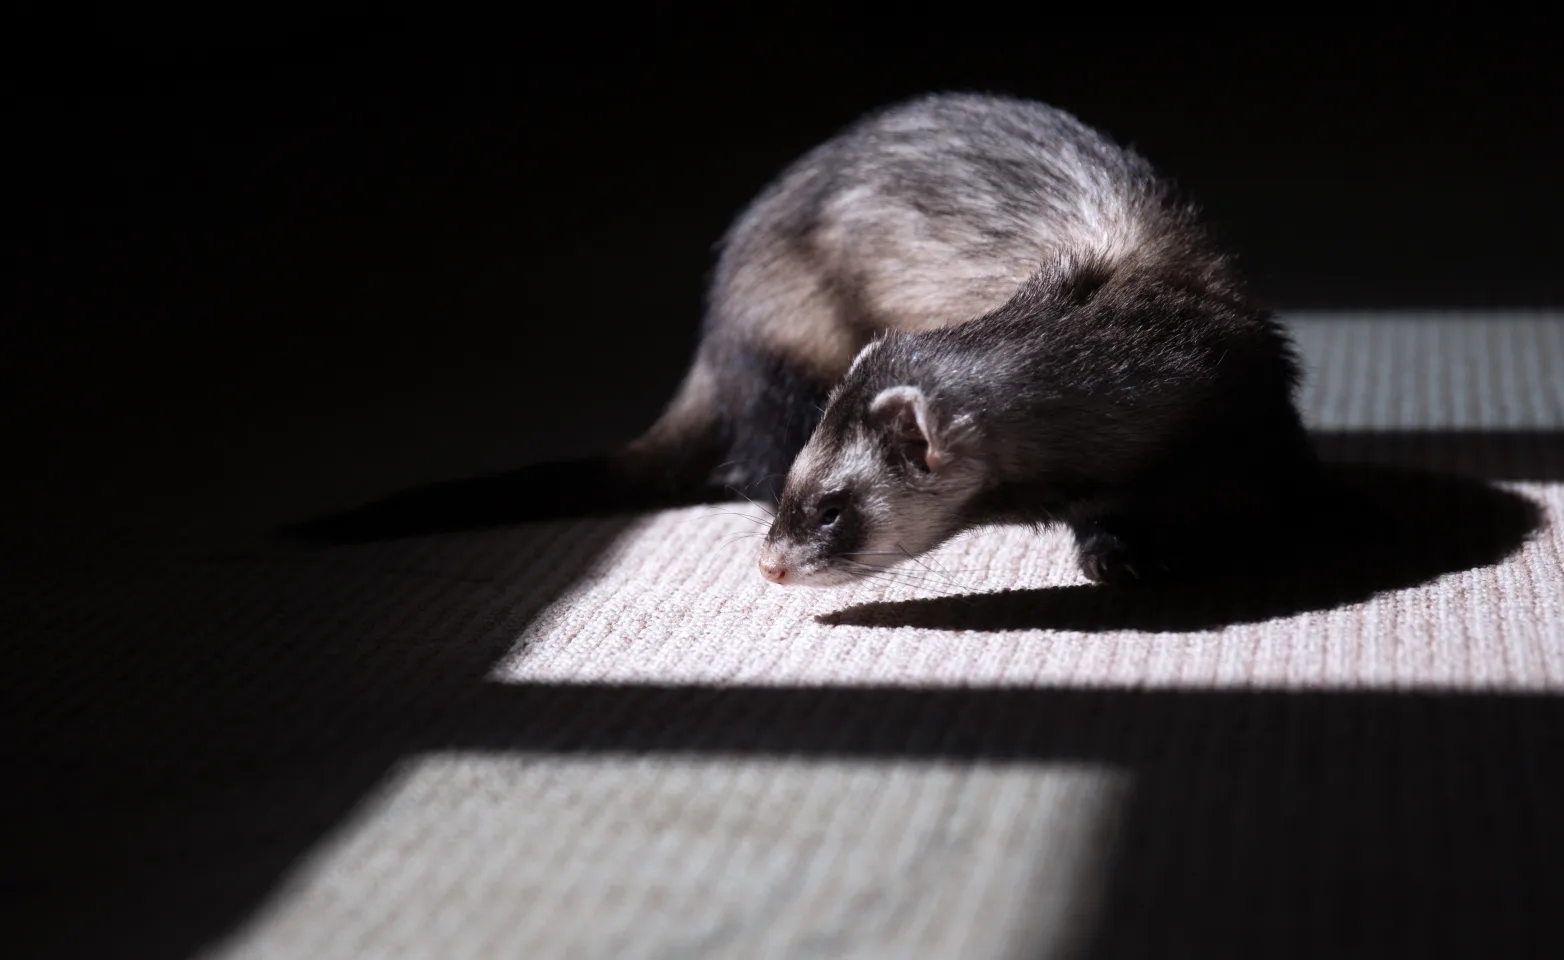 Ferret in home in the shadows